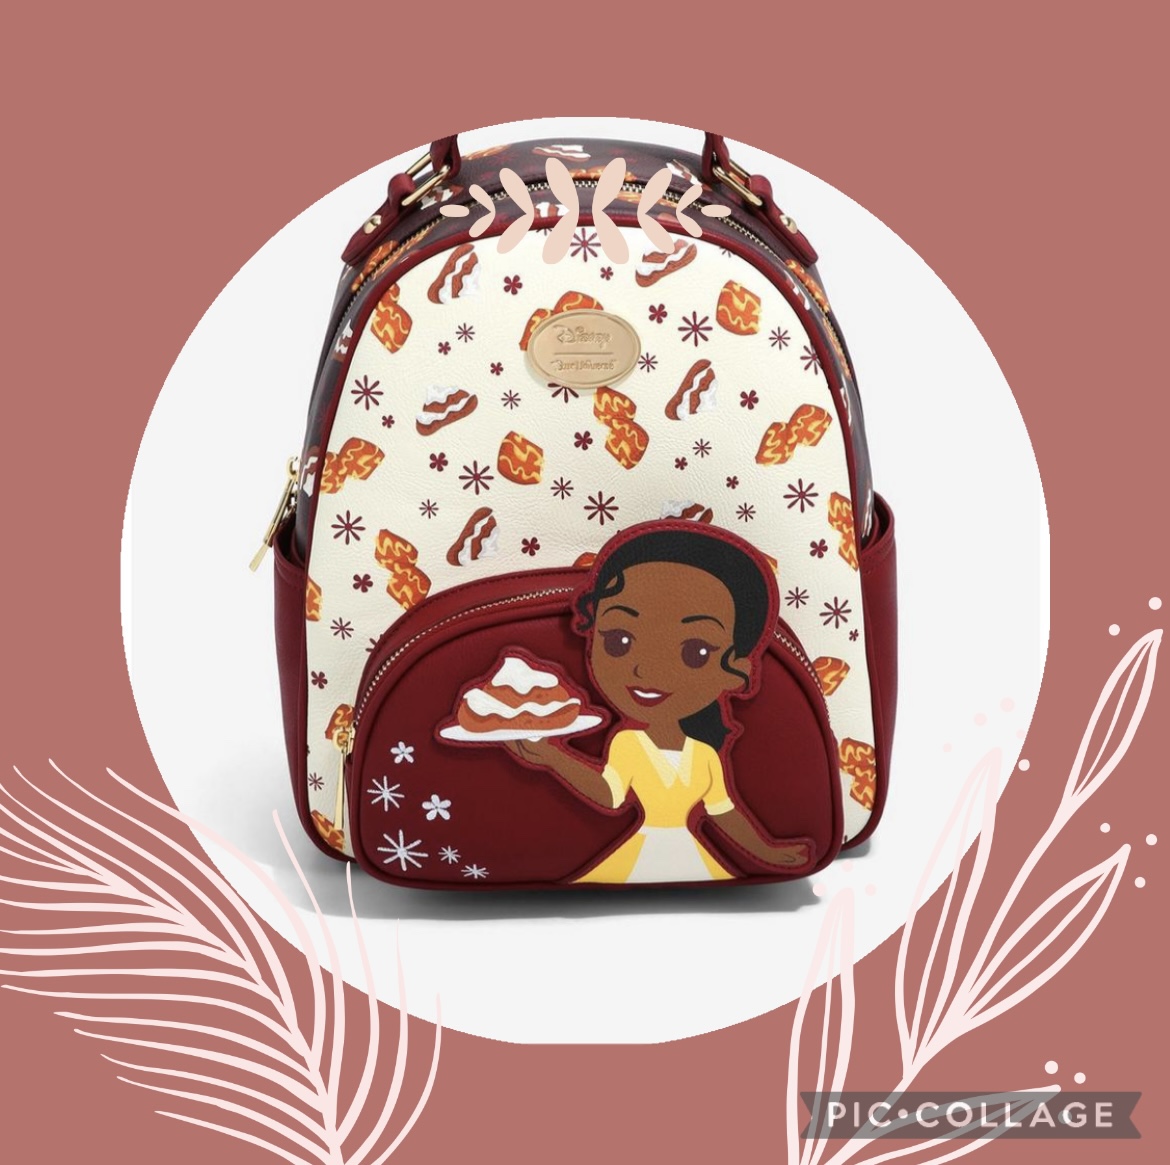 Jazz Things Up With Loungefly's 'Princess and the Frog Decades Backpack! 